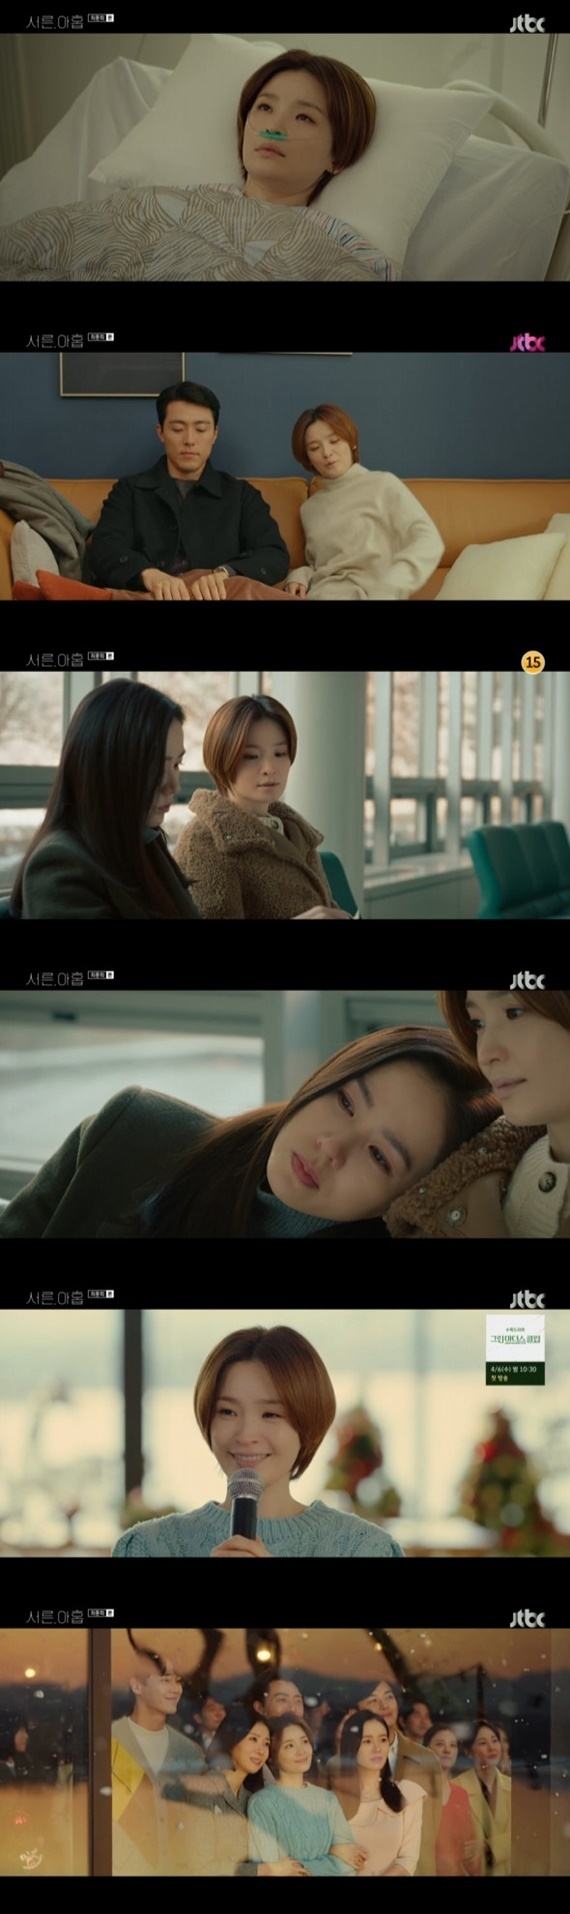 Seoul:) = Thirty, nine Jeun Mi-do diesAt the final episode of JTBCs tree drama Thirty, Nine (playplayed by Yoo Young-ah/director Kim Sang-ho), which was broadcast at 10:30 p.m. on the 31st, it included the images of Jeong Chan-young (Jeun Mi-do), who died and the remaining people.Chung Chan-youngs condition deteriorated, and the time for family and friends to prepare for their hearts came.Chung Chan-young, who had a lot of thoughts at the hospital, delivered the list of obituaries written directly to Cha Mi-jo (Son Ye-jin).Chamijo told Chung Chan-young, Dear and said, It is intimate and precious.Then, Chung Chan-youngs mother Kim Kyung-ae (Nam Ki-ae) left Kim Jin-suk with Jeong Chan-young, who looks comfortable with Kim Jin-suk (This is life), and returned to Yangpyeong station.While the clear and cloudy day continued, Chamijo and Jang Joo-hee (Kim Ji-hyun) planned the Funeral, which made Chung Chan-youngs obituary list as a brunch list.Chung Chan-young, who was going to eat Kim Jin-suk and brunch and go to Yangpyeong station, cried with gratitude and gratitude to the situation where all the people on his obituary list gathered.Chung Chan-young, who realized that this day was for him, grabbed the microphone and said hello to the center.Chung Chan-young, who laughed at me to do a health checkup, recalled his life, saying, I will not live half as much as others, but I am more quality than sheep, I am enough.Chung Chan-young said, It was my life that was enough for parents love, caring for loved ones, and friends love, thanks to you.Chamijo remembered the day: We didnt cry anyone, we didnt all lose our smiles.In the end, Chung Chan-young died, and Cha Mi-jo thought, I cried less than I thought, and I lived better than I thought. Jang Joo-hee set up a nail shop next to Park Hyun-joon (Lee Tae-hwan) shop that he had dated.On Kim Kyung-aes birthday, Kim Jin-suk, Cha Mi-jo and Jang Joo-hee, who played son-in-law with the cake asked by Miri before Chung Chan-young died, visited Kim Kyung-ae.Cha Mi-jo, who is about to marry Kim Sun-woo (played by Yeon Woo-jin), decided to adopt Choi Hoon (played by Park Jae-joon). The rest of the people kept the things Chung Chan-young asked for.On the release date of the movie, which was taken by Chung Chan-young, the remaining people cried and laughed at the movie, but Cha Mi-jo was sorry and did not see the movie.The gift left by Chung Chan-young arrived late to Chami-jo, who left a video letter on USB with a bracelet gift.Chung Chan-young said, Thank you for making the obituary list a brunch list, I was the most exciting The Funeral.Chung Chan-young added, You are very intimate, precious, I am a dear to you.Cha Mi-jo and Jang Joo-hee, who were two in three, still missed Chung Chan-young.On the other hand, JTBC Tree Drama Thirty, Nine is a real human romance drama that deals with the friendship, love and deep story of three friends who are about forty.